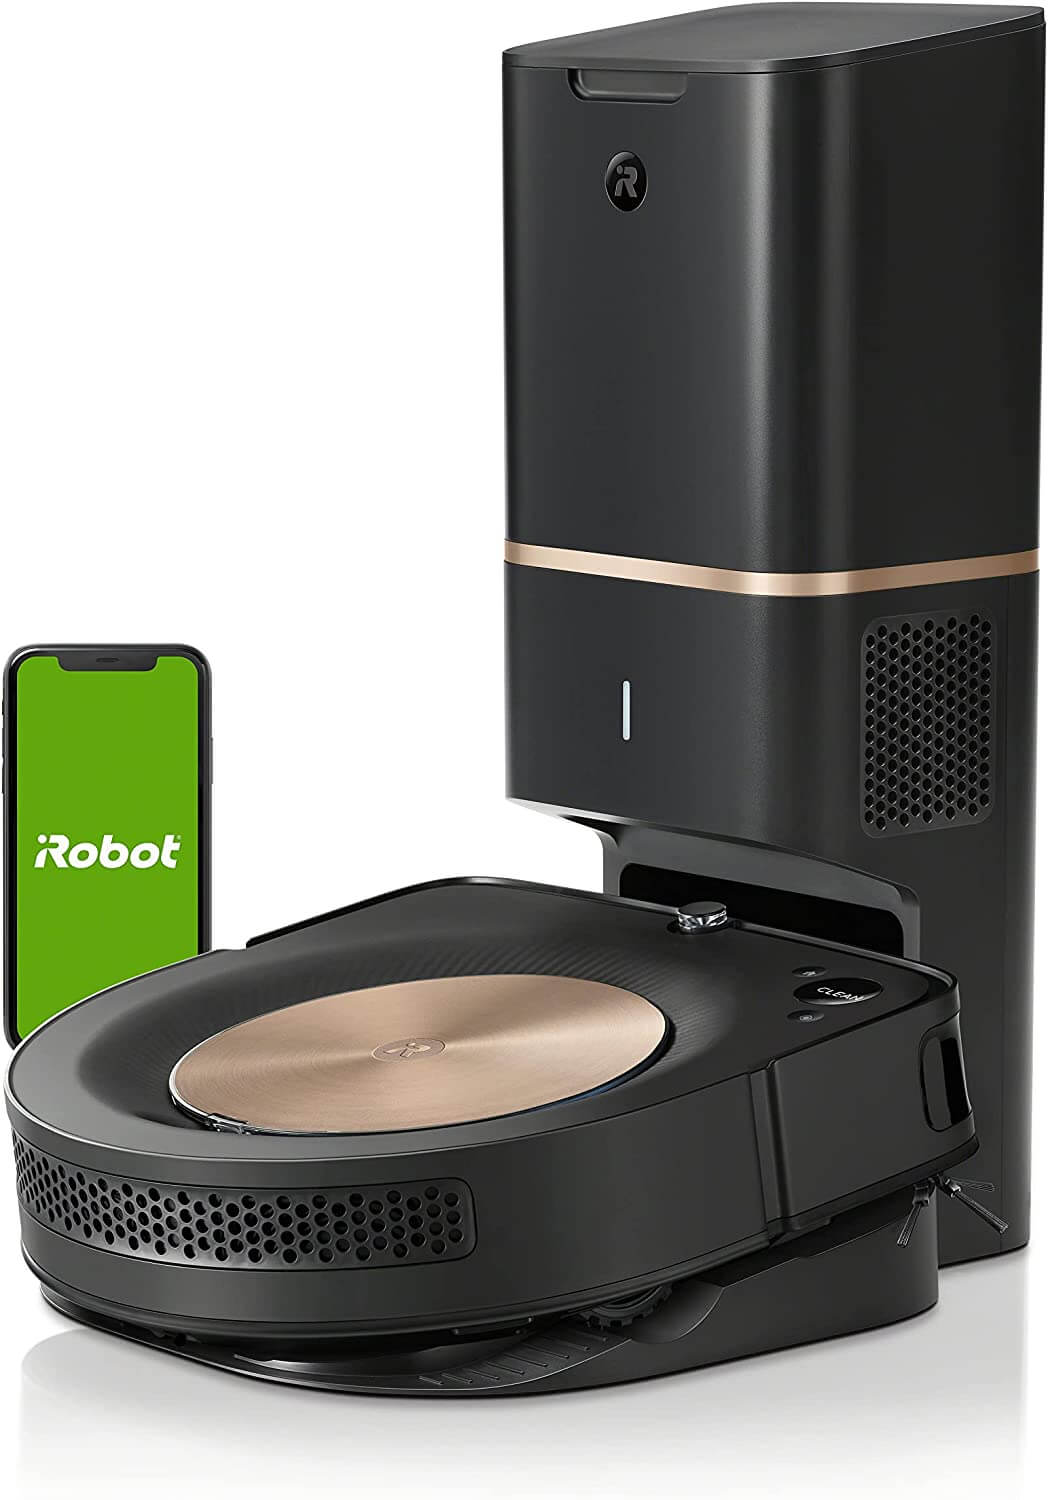 iRobot Roomba s9+ (9550) Self Emptying Robot Vacuum - Empties Itself for up to 60 Days, Detects & Cleans Around Objects in Your Home, Smart Mapping, Powerful Suction, Corner & Edge Cleaning